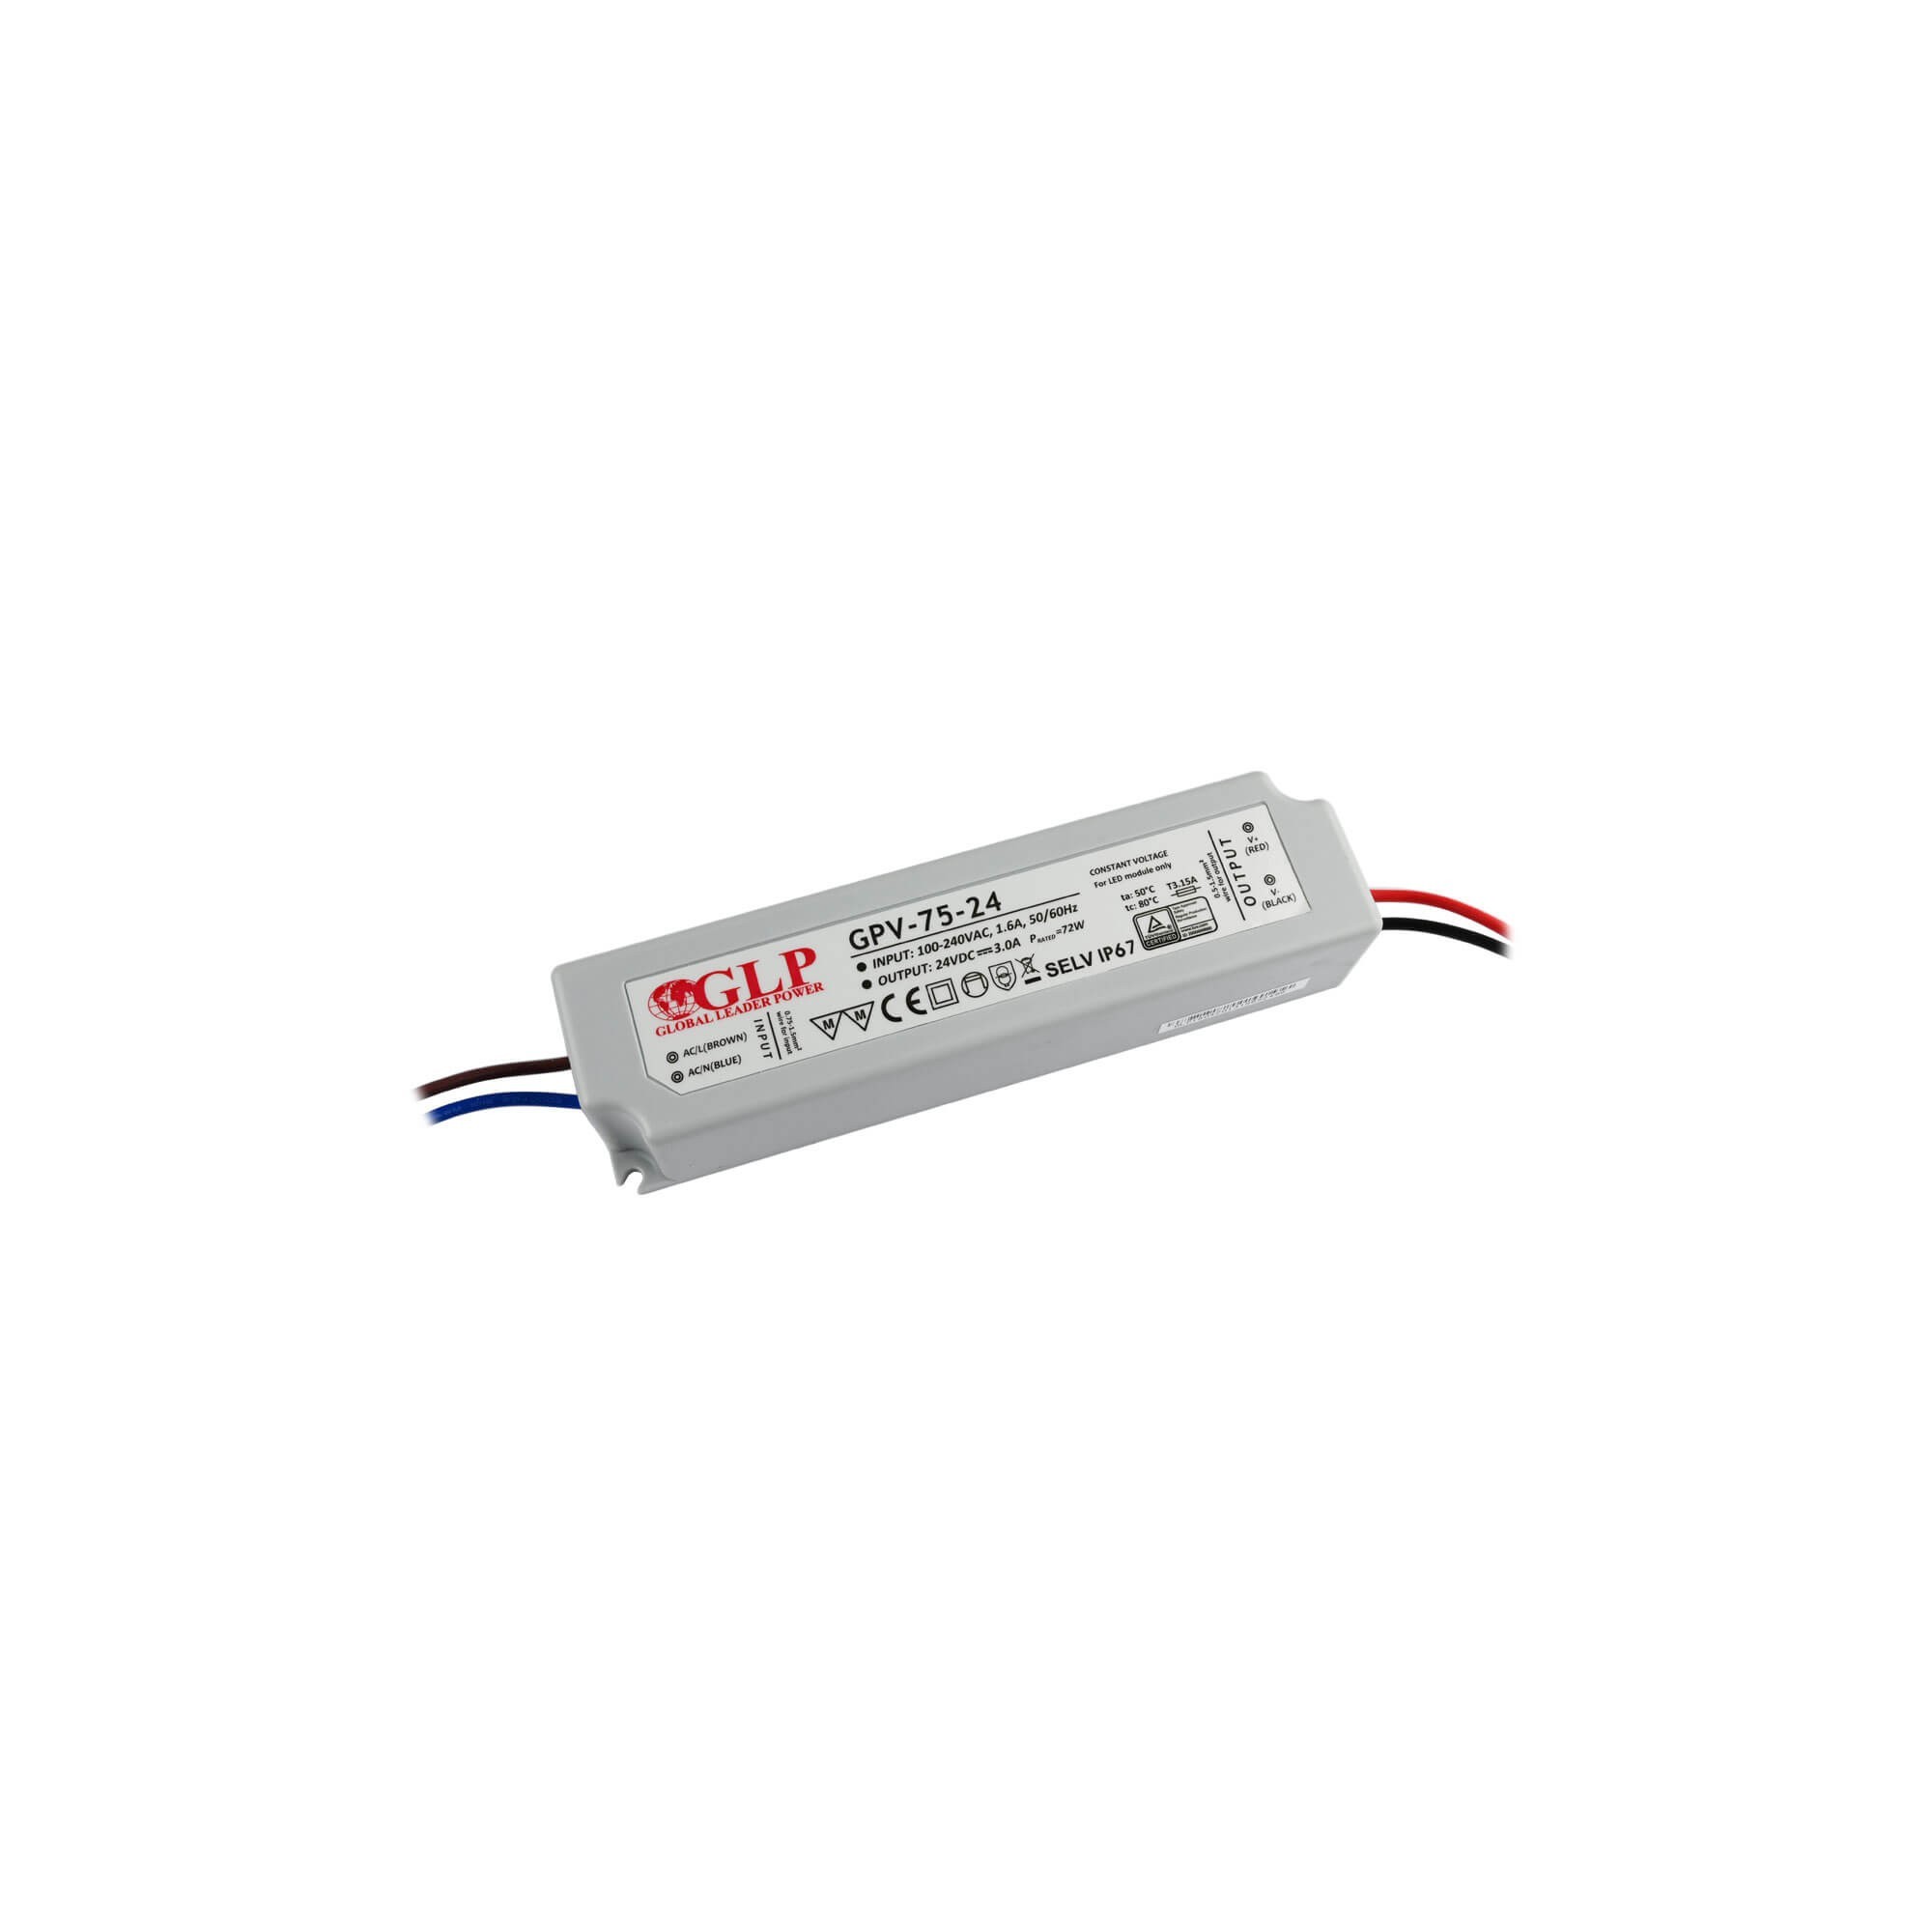 LED constante spanning voeding 72W 24V DC